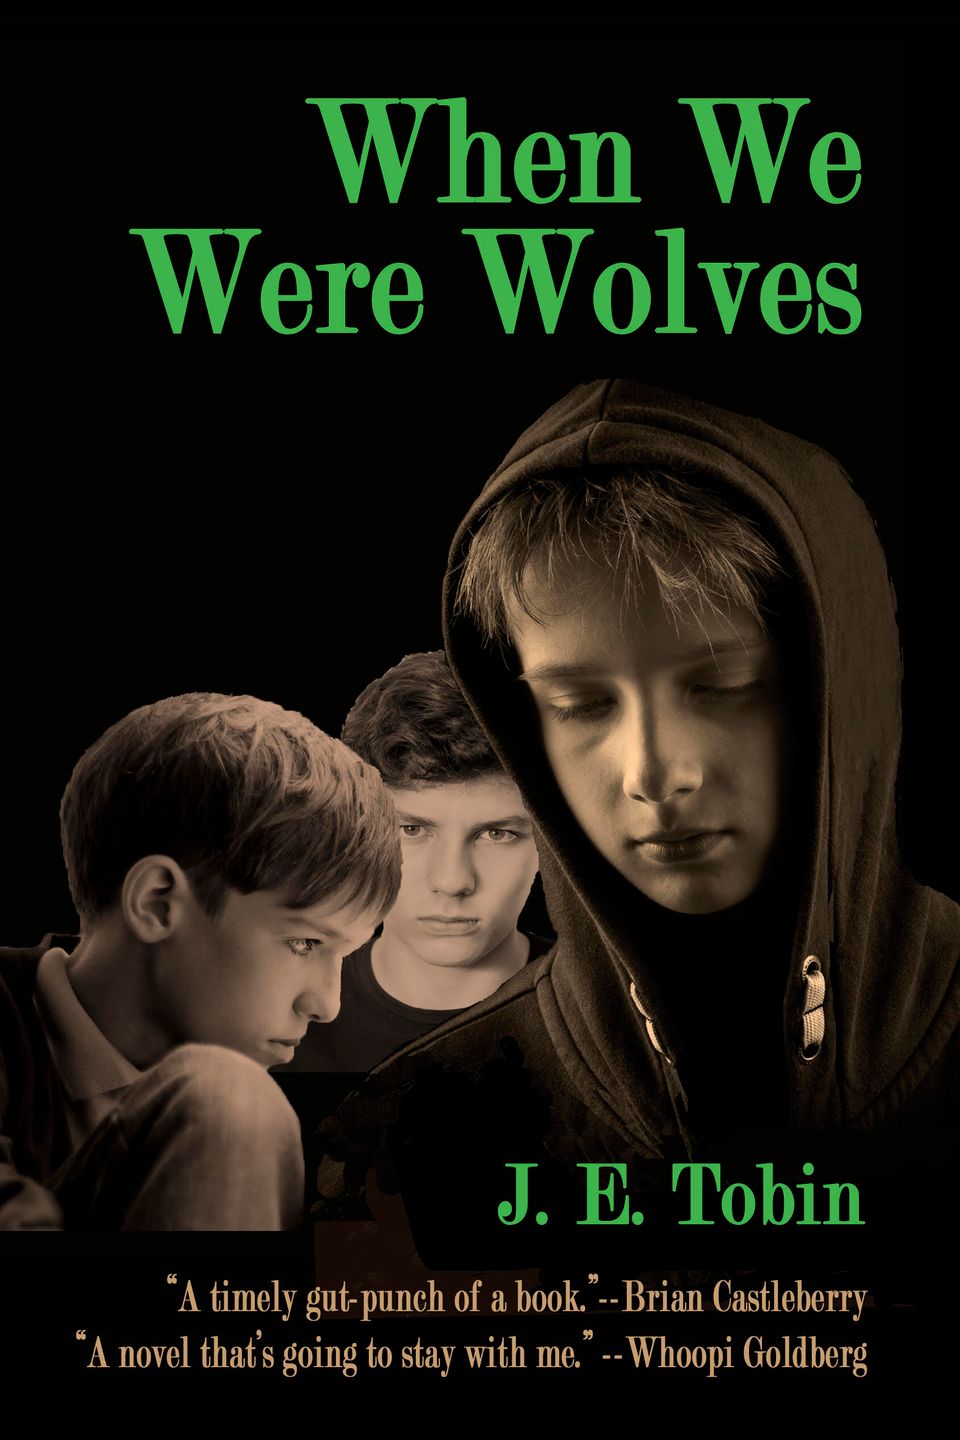 When we were wolves